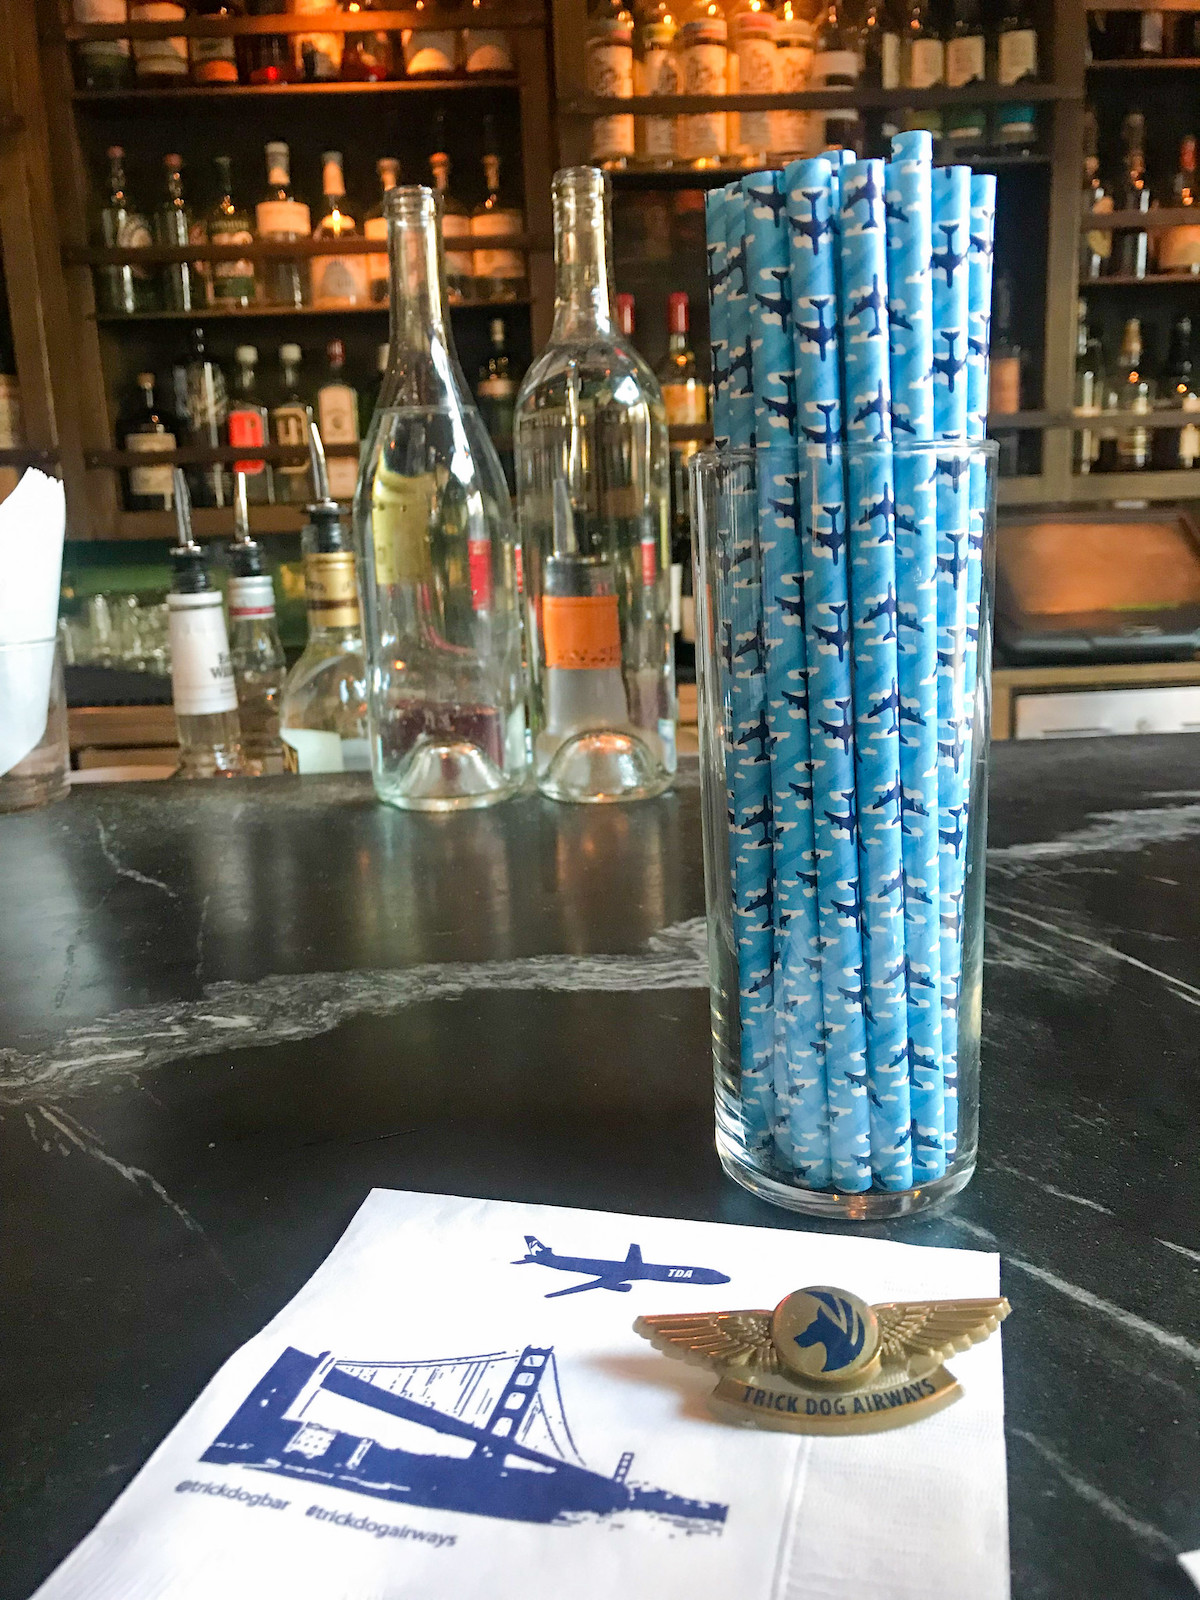 Picture of the marble bar at Trick Dog Bar in San Francisco, with a glass full of blue straws decorated with airplanes and shelves of liquor bottles behind the bar